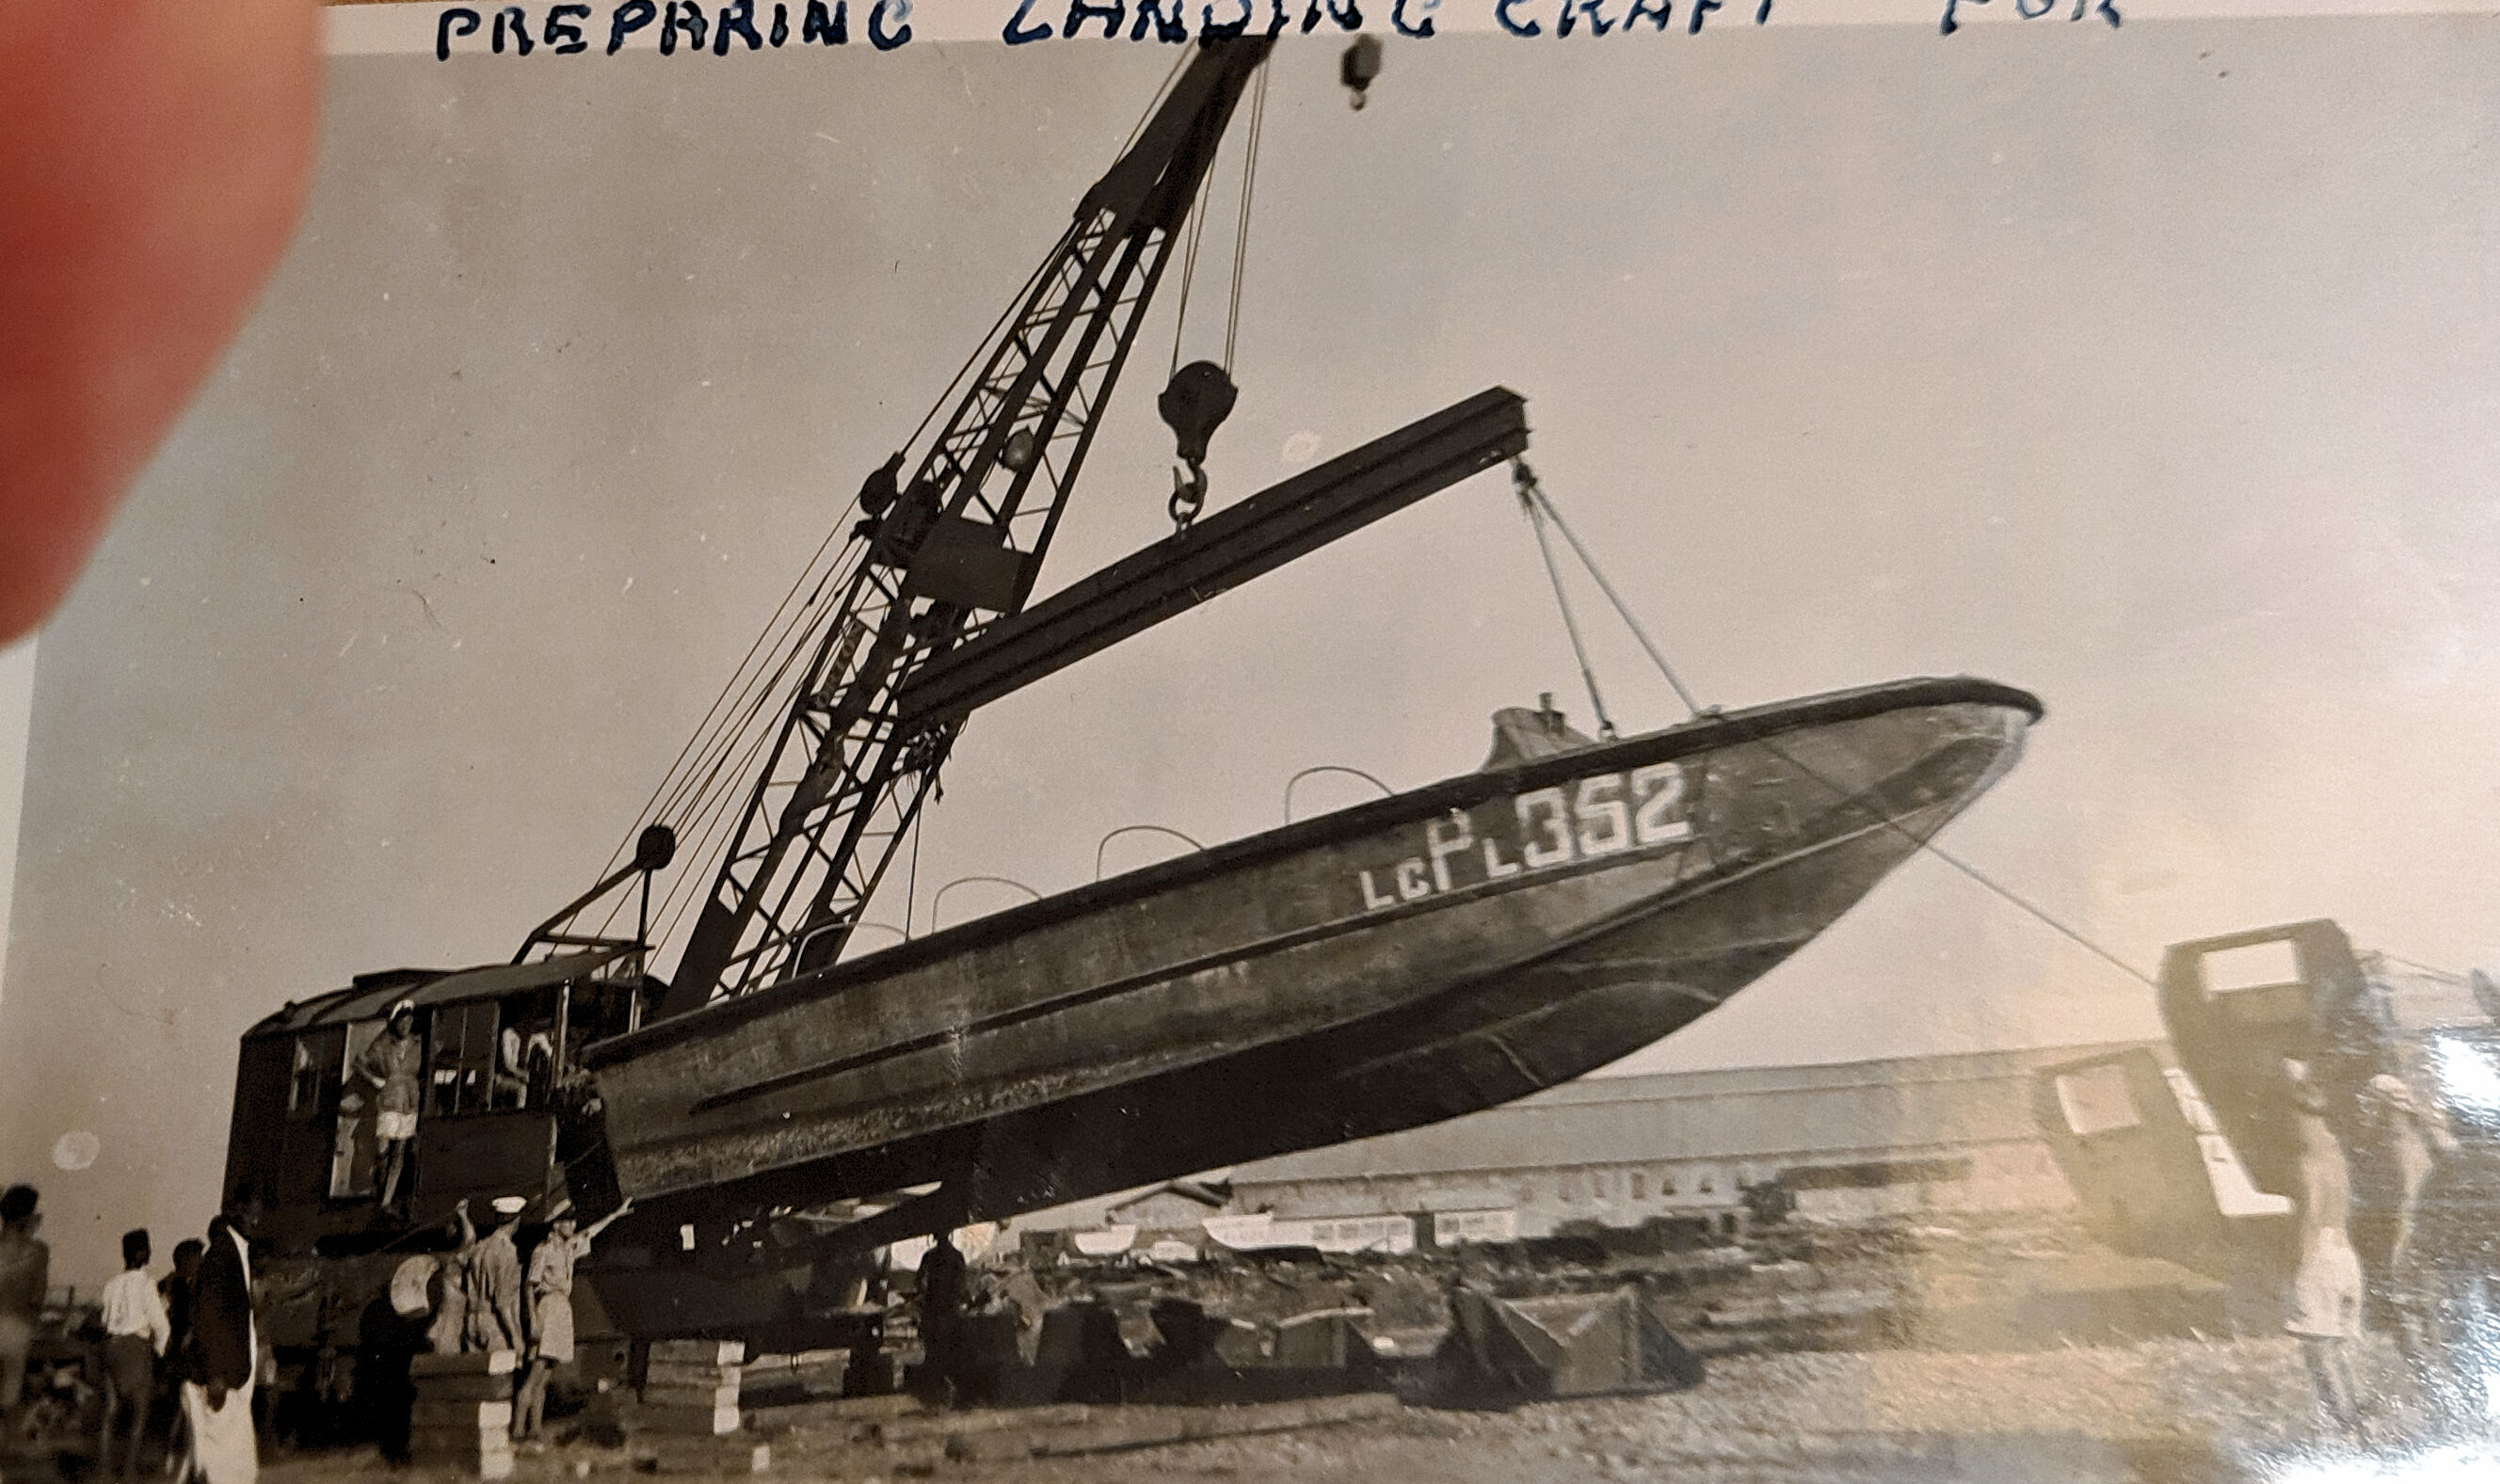 Landing craft LcpI 352 being prepared for scrapping, Bombay harbour 1946